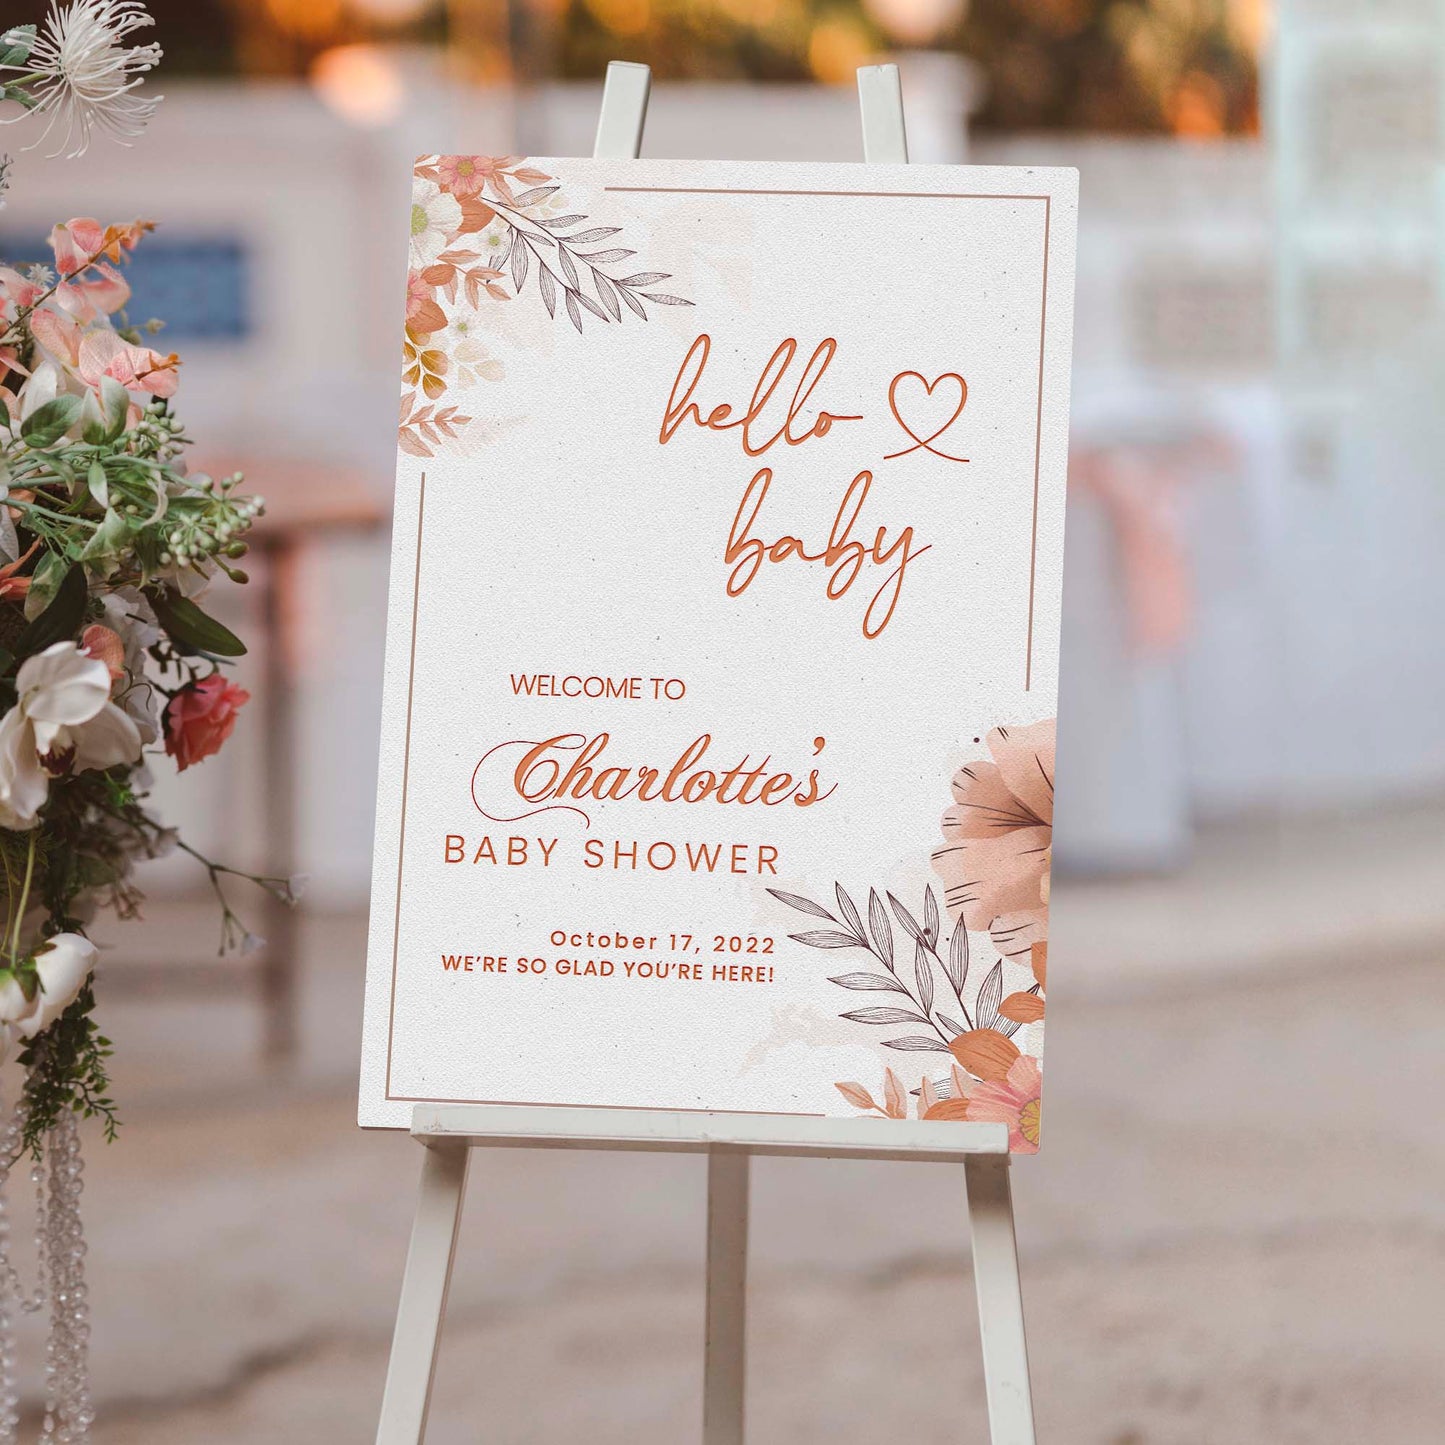 Hello Baby, Baby Shower Portrait Sign  - Image by Tailored Canvases